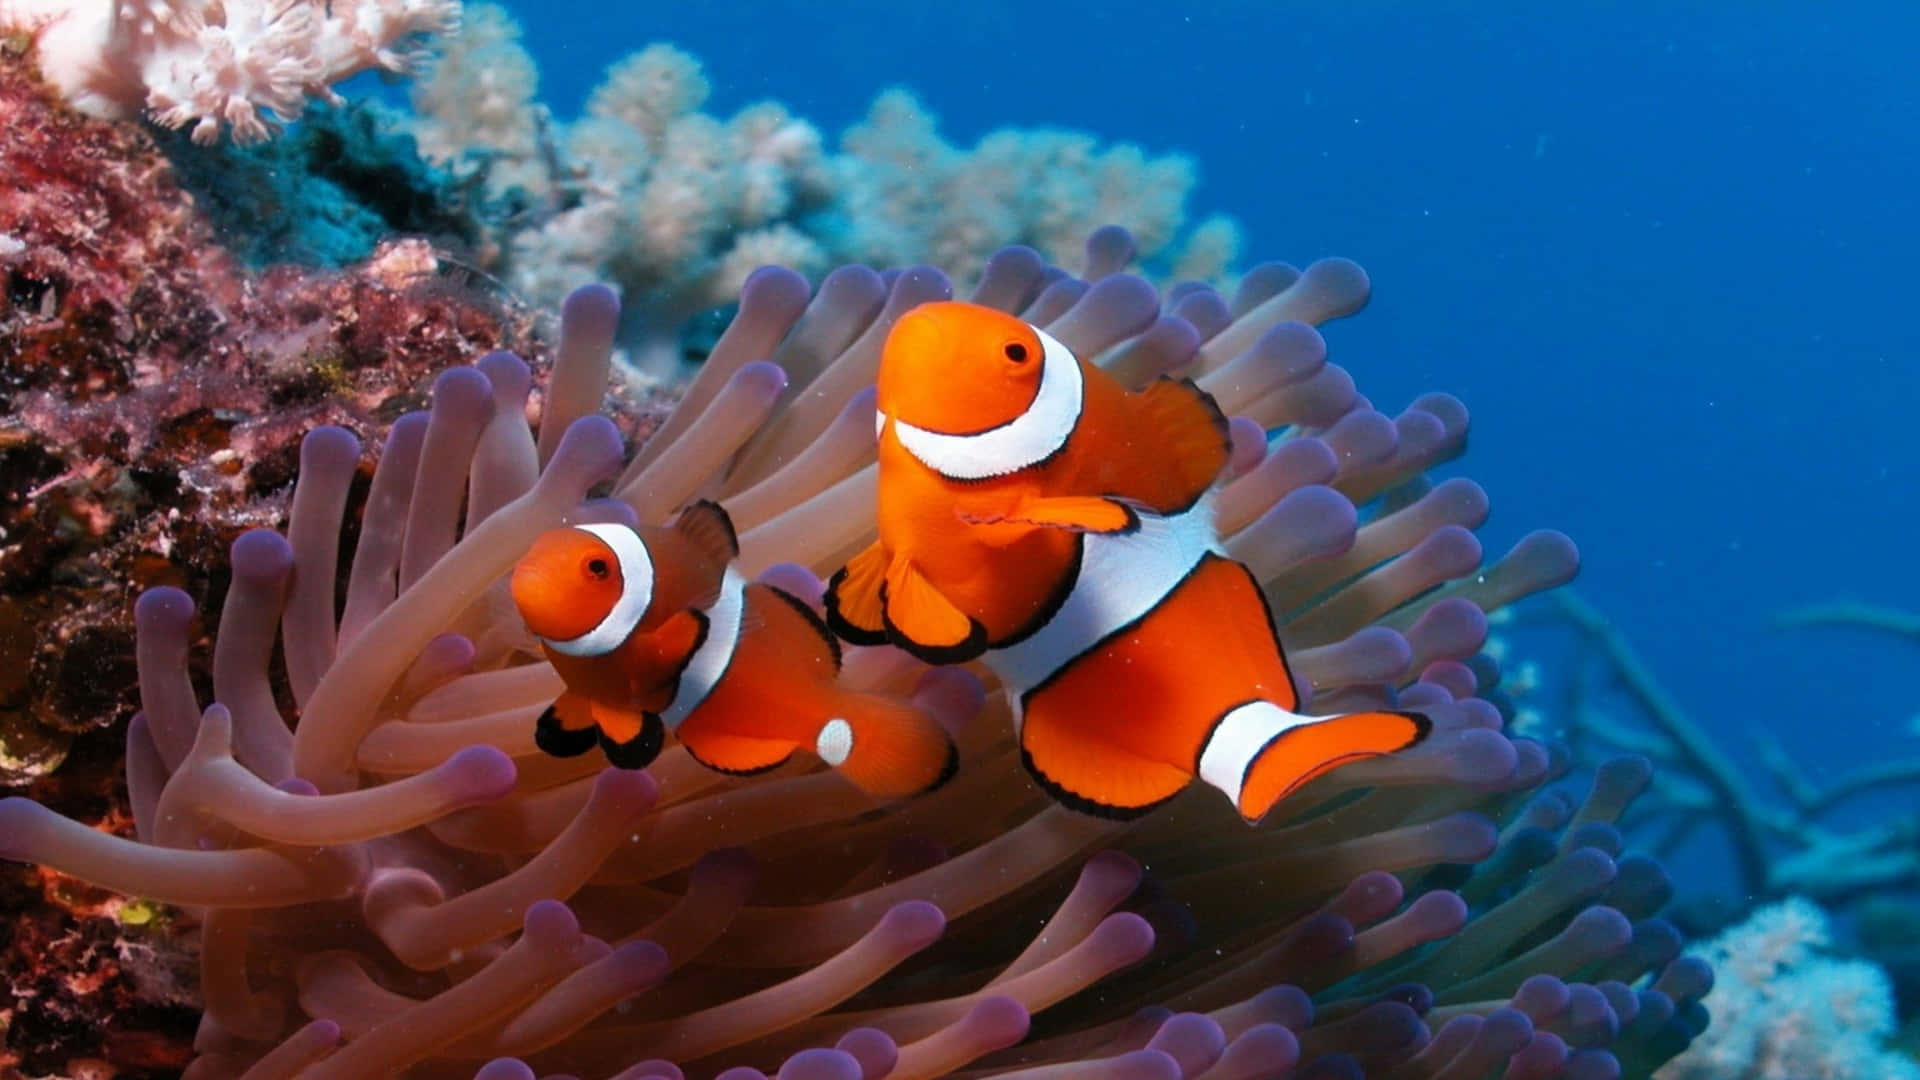 Colorful 4K Fish Featuring Clownfish Wallpaper